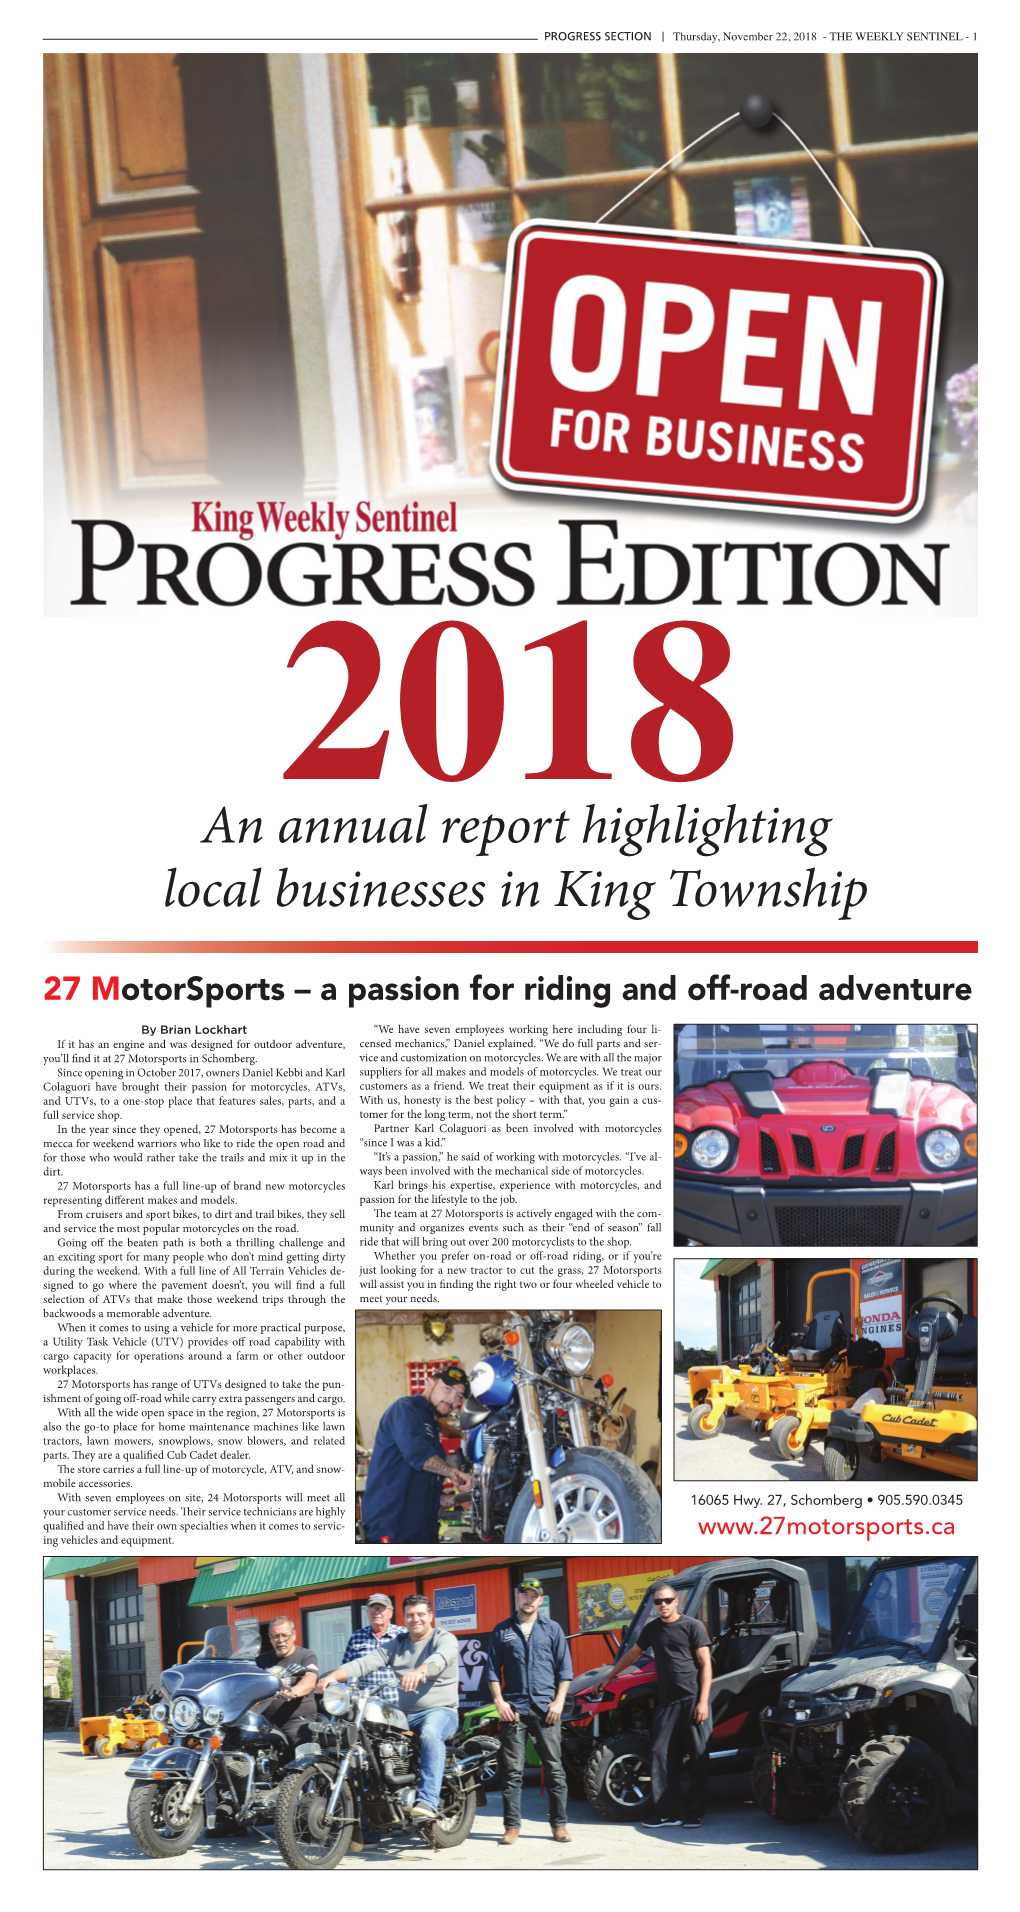 An Annual Report Highlighting Local Businesses in King Township